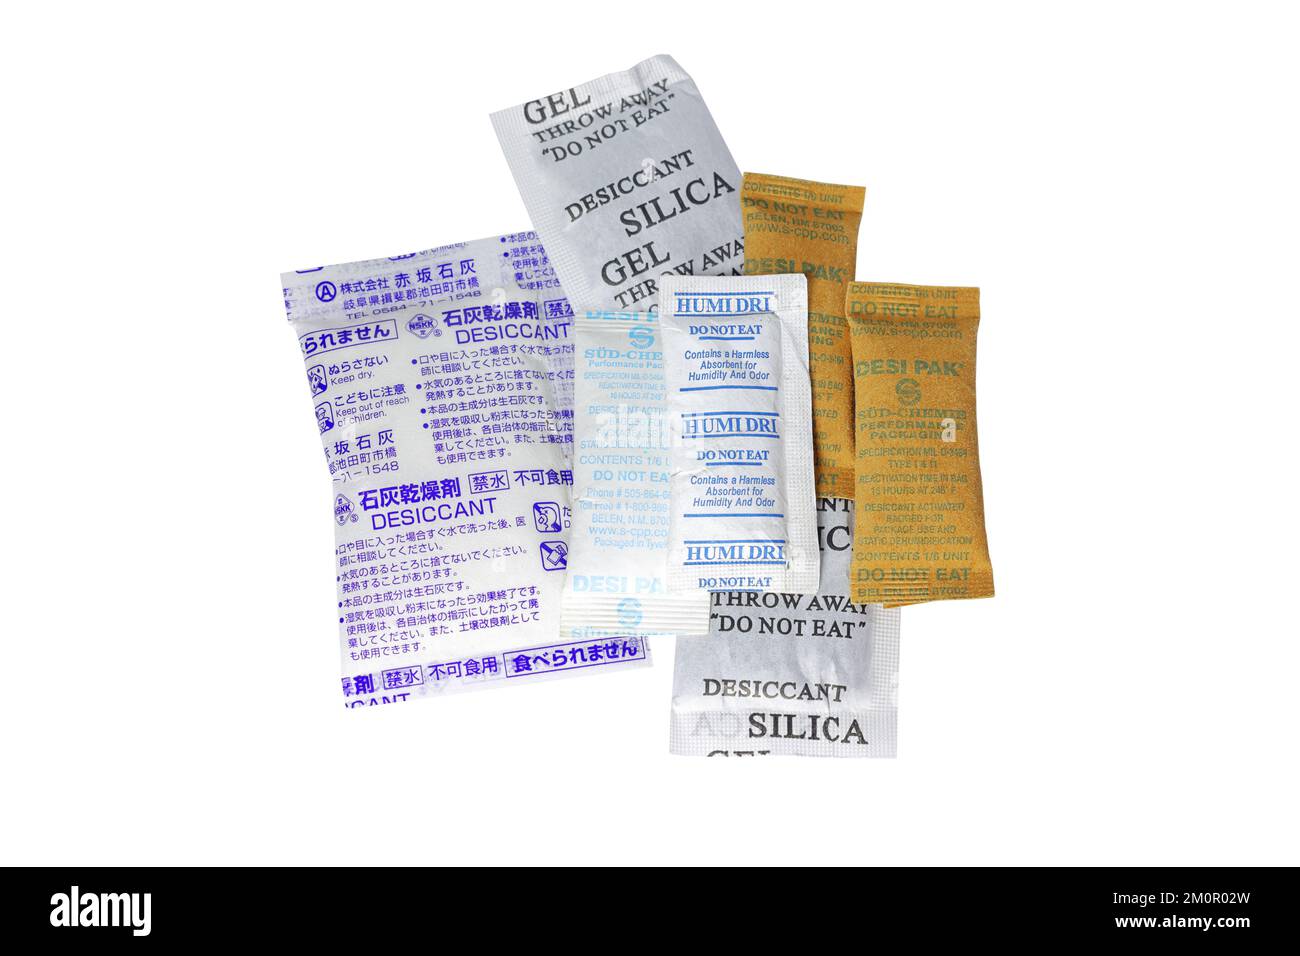 A collection of silicon dioxide, and calcium oxide desicant packets isolated on a white background. cutout image for illustration and editorial use. Stock Photo